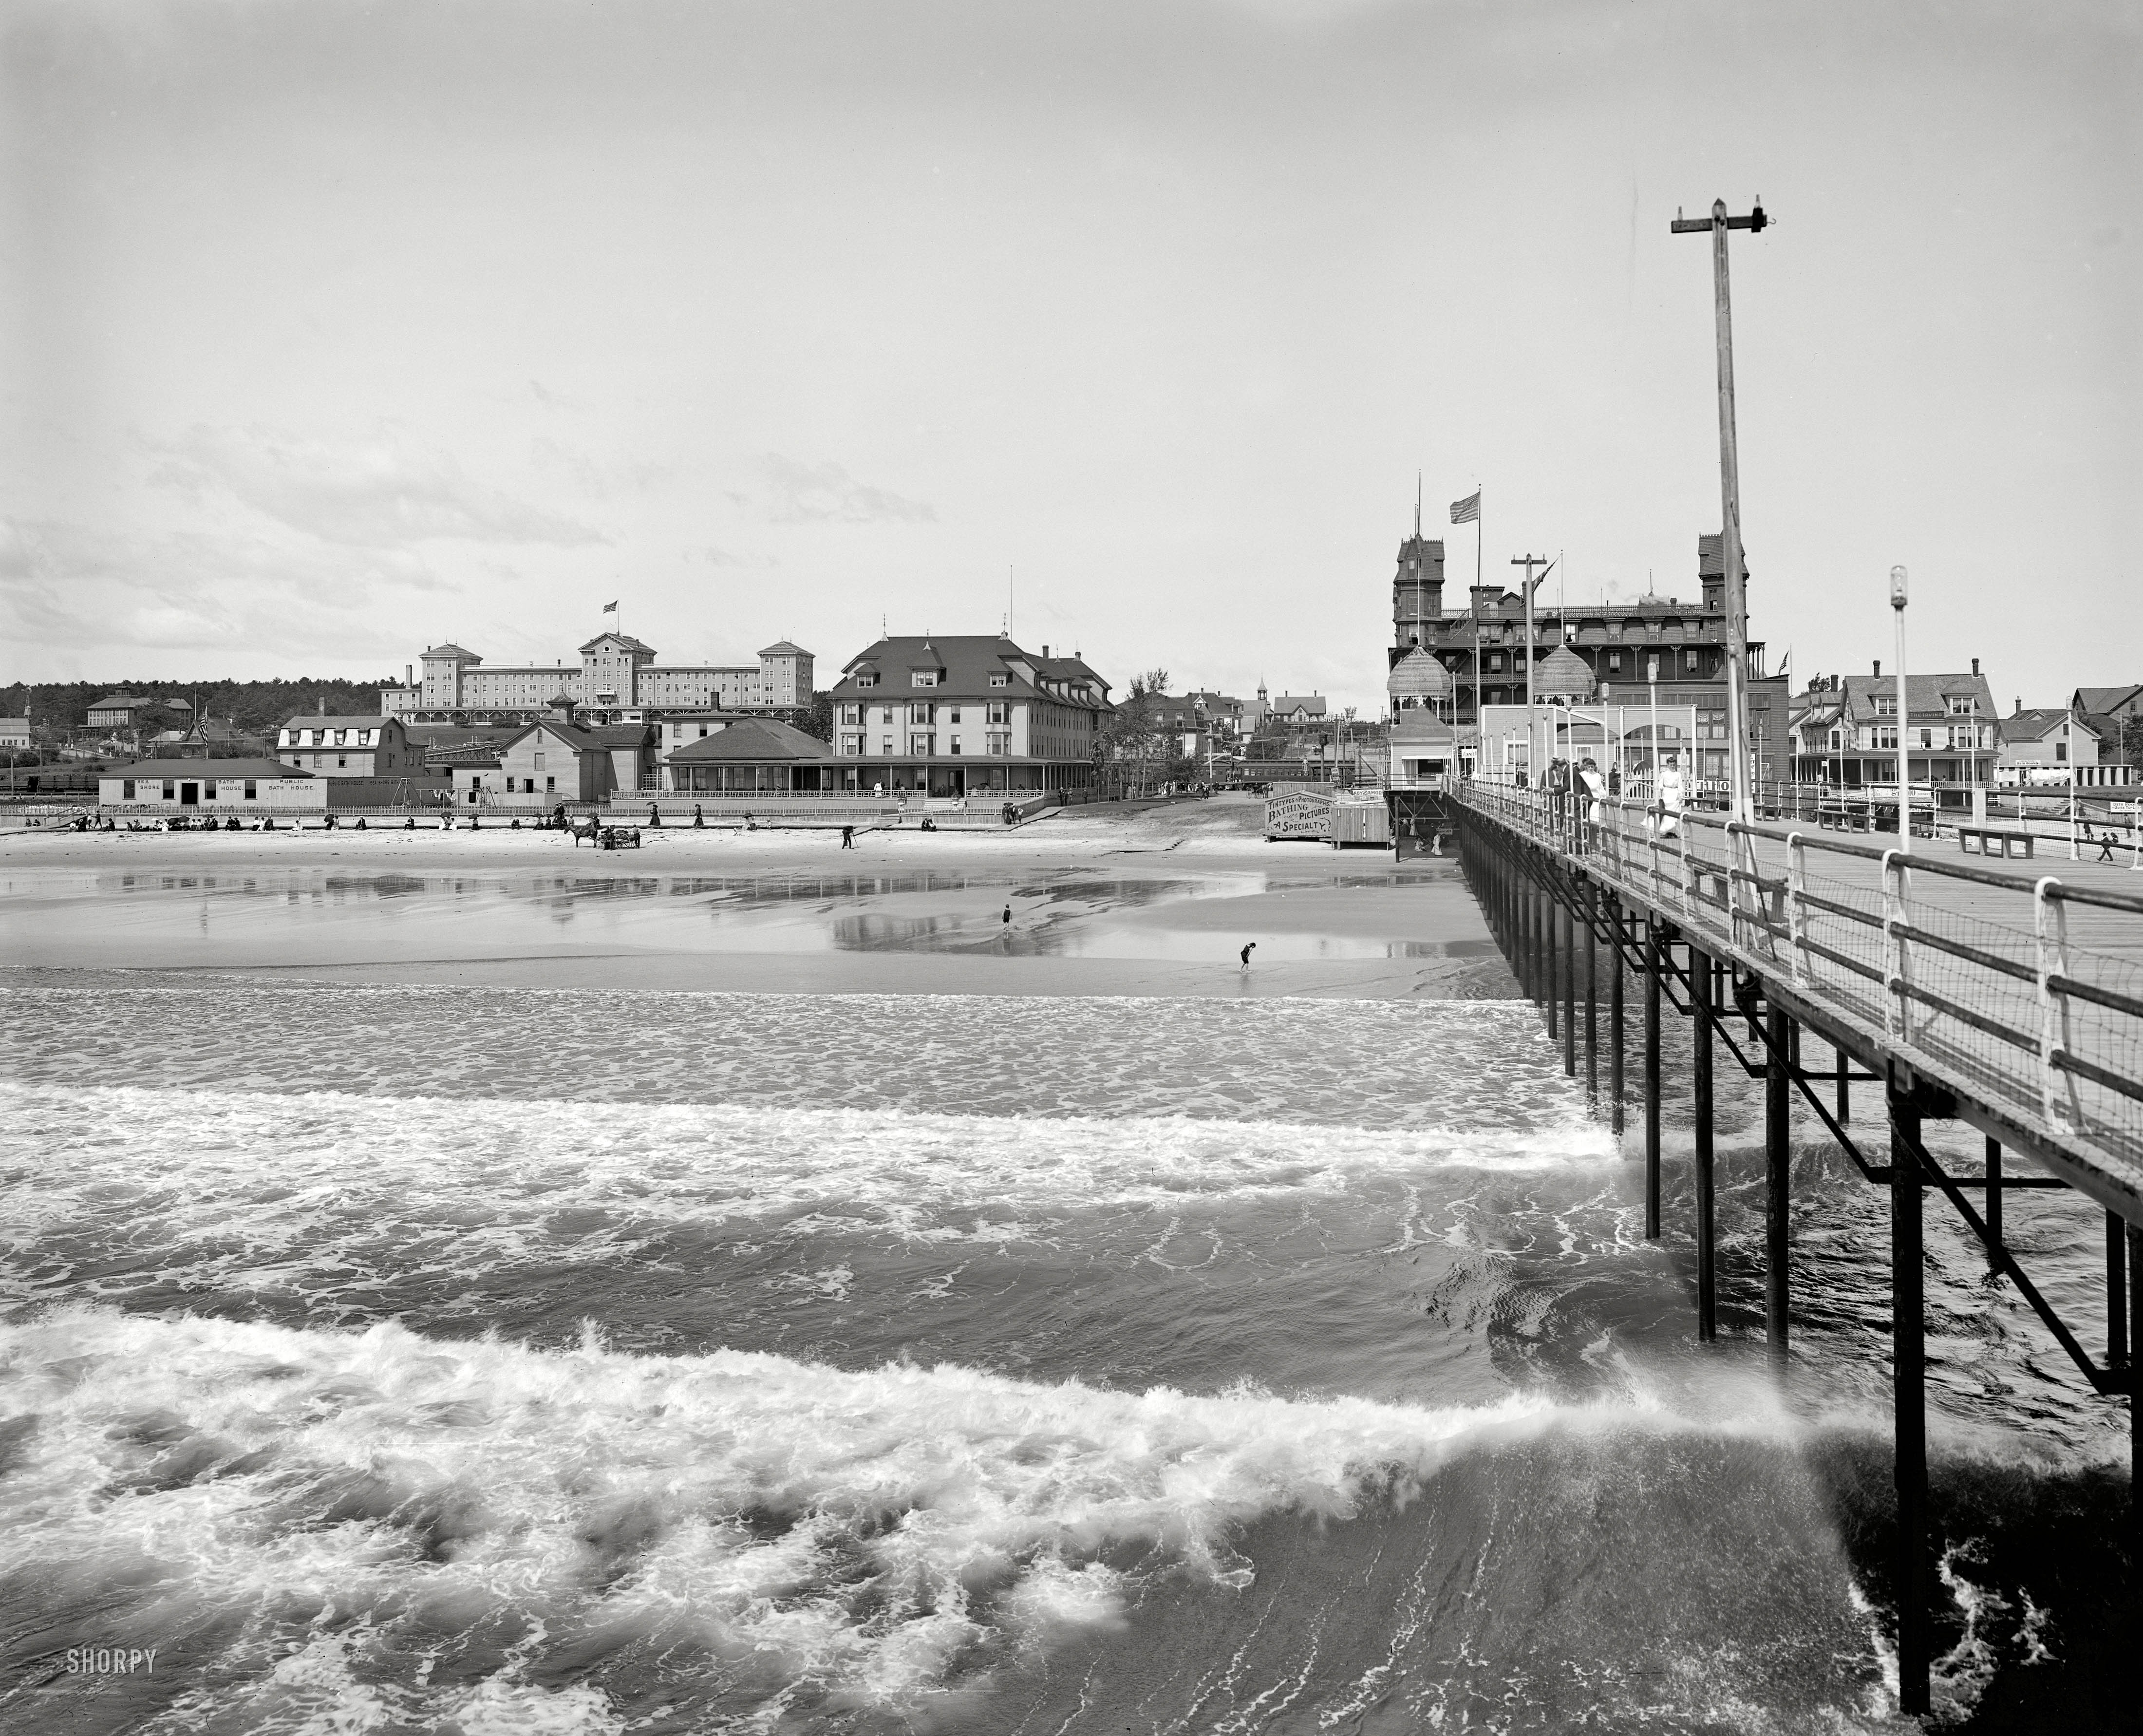 Circa 1904. "Old Orchard, Maine, from pier." Surf, sand, and Lady Zamora. 8x10 inch dry plate glass negative, Detroit Publishing Company. View full size.